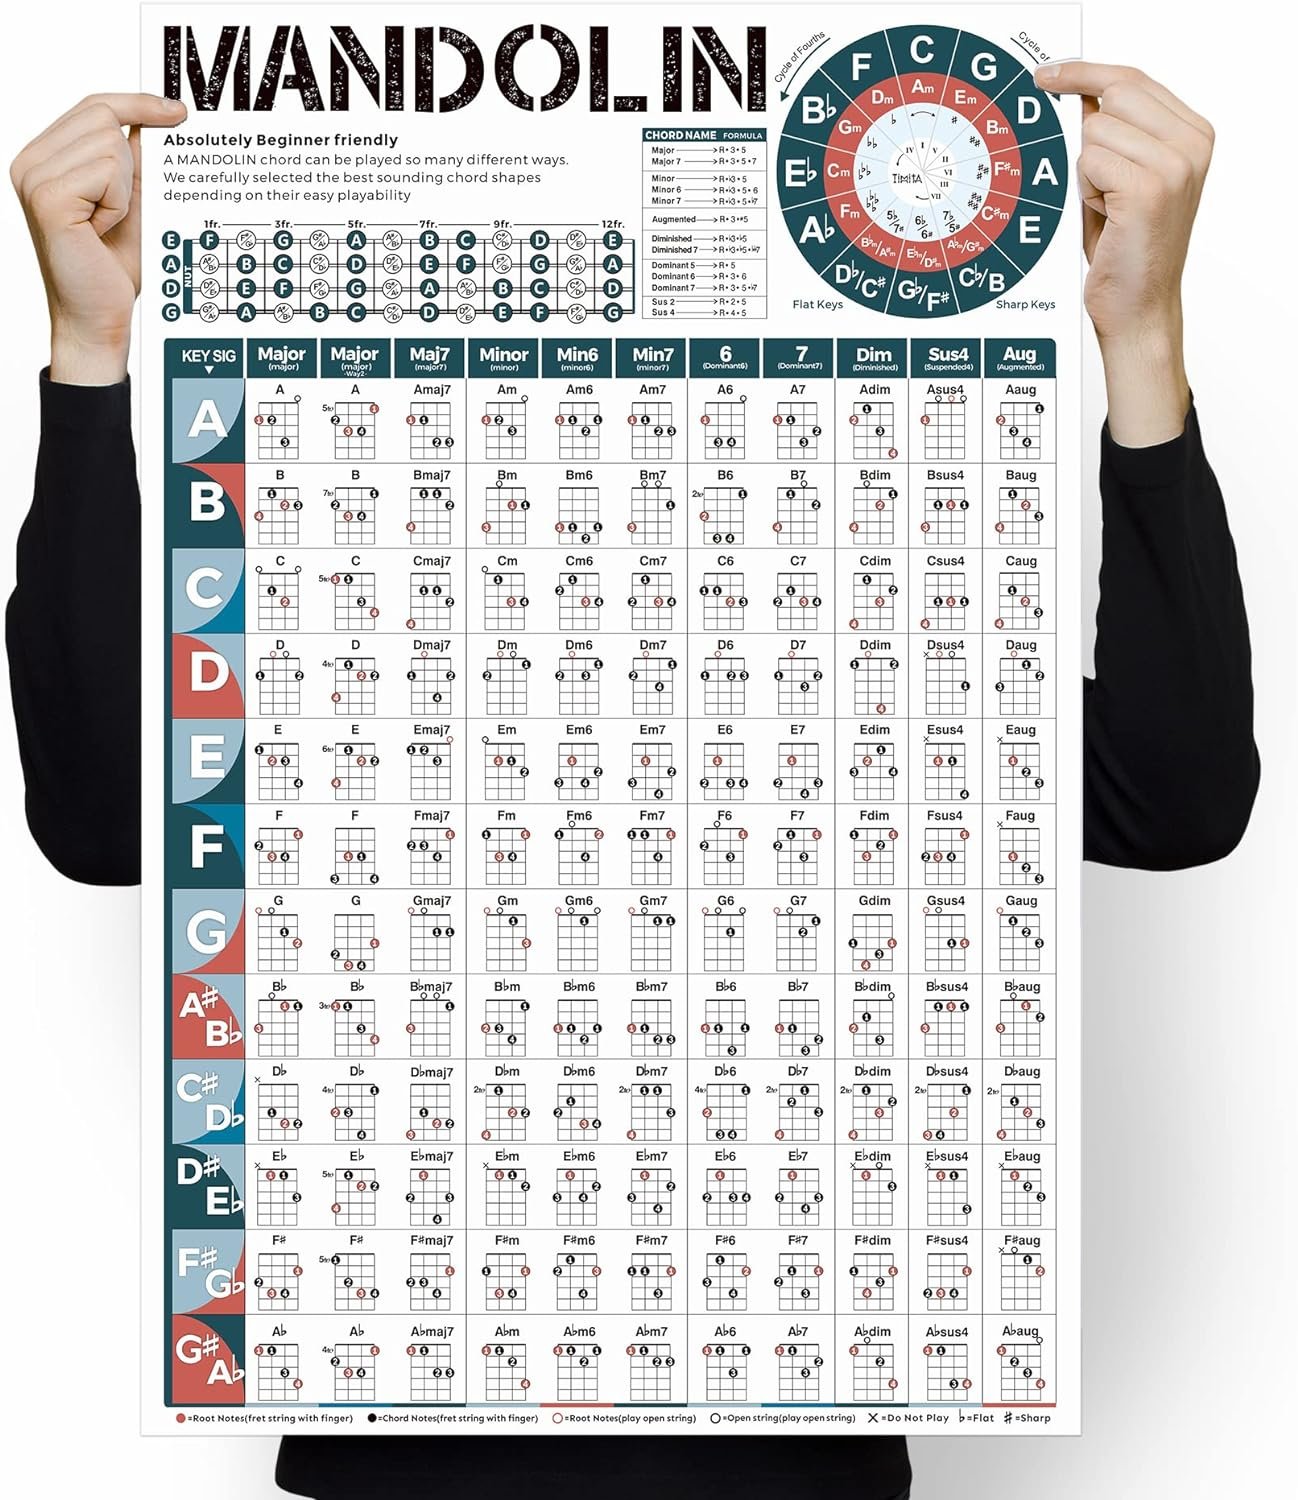 Mandolin Chord Chart Poster - 16x24 Wall Chart for Comprehensive Reference Guide of Easy Chord Diagrams, Fingerings Practice, Circle of Fifths for Beginner, Perfect Mandolin Learning Aid